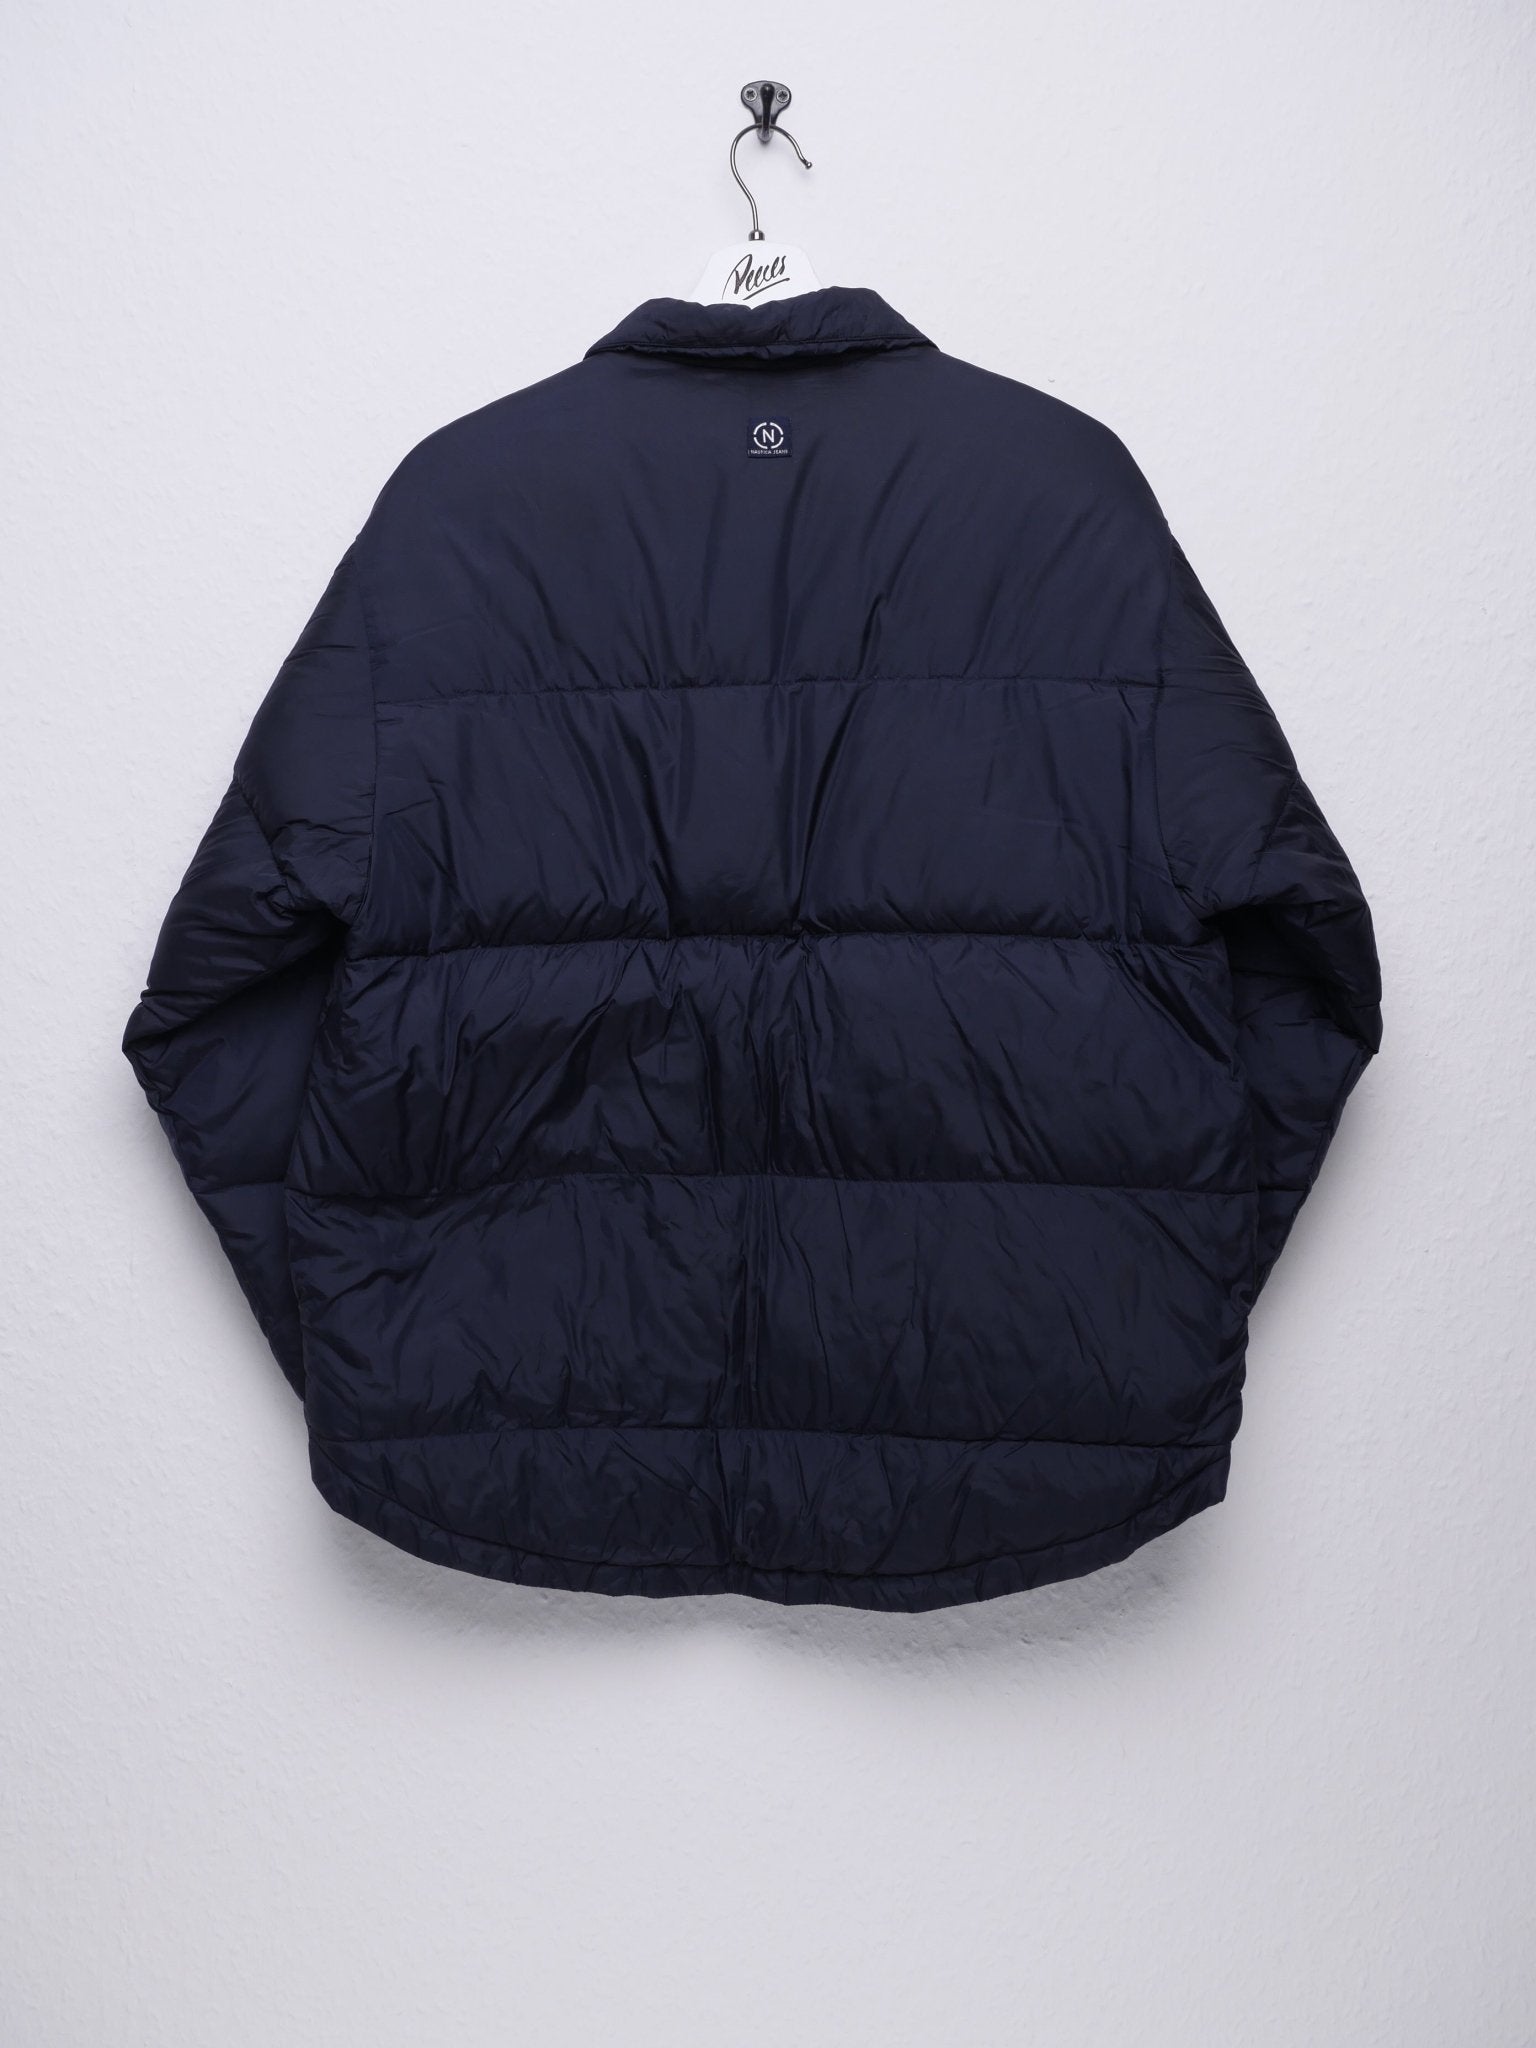 nautica patched Logo navy Puffered Jacke - Peeces